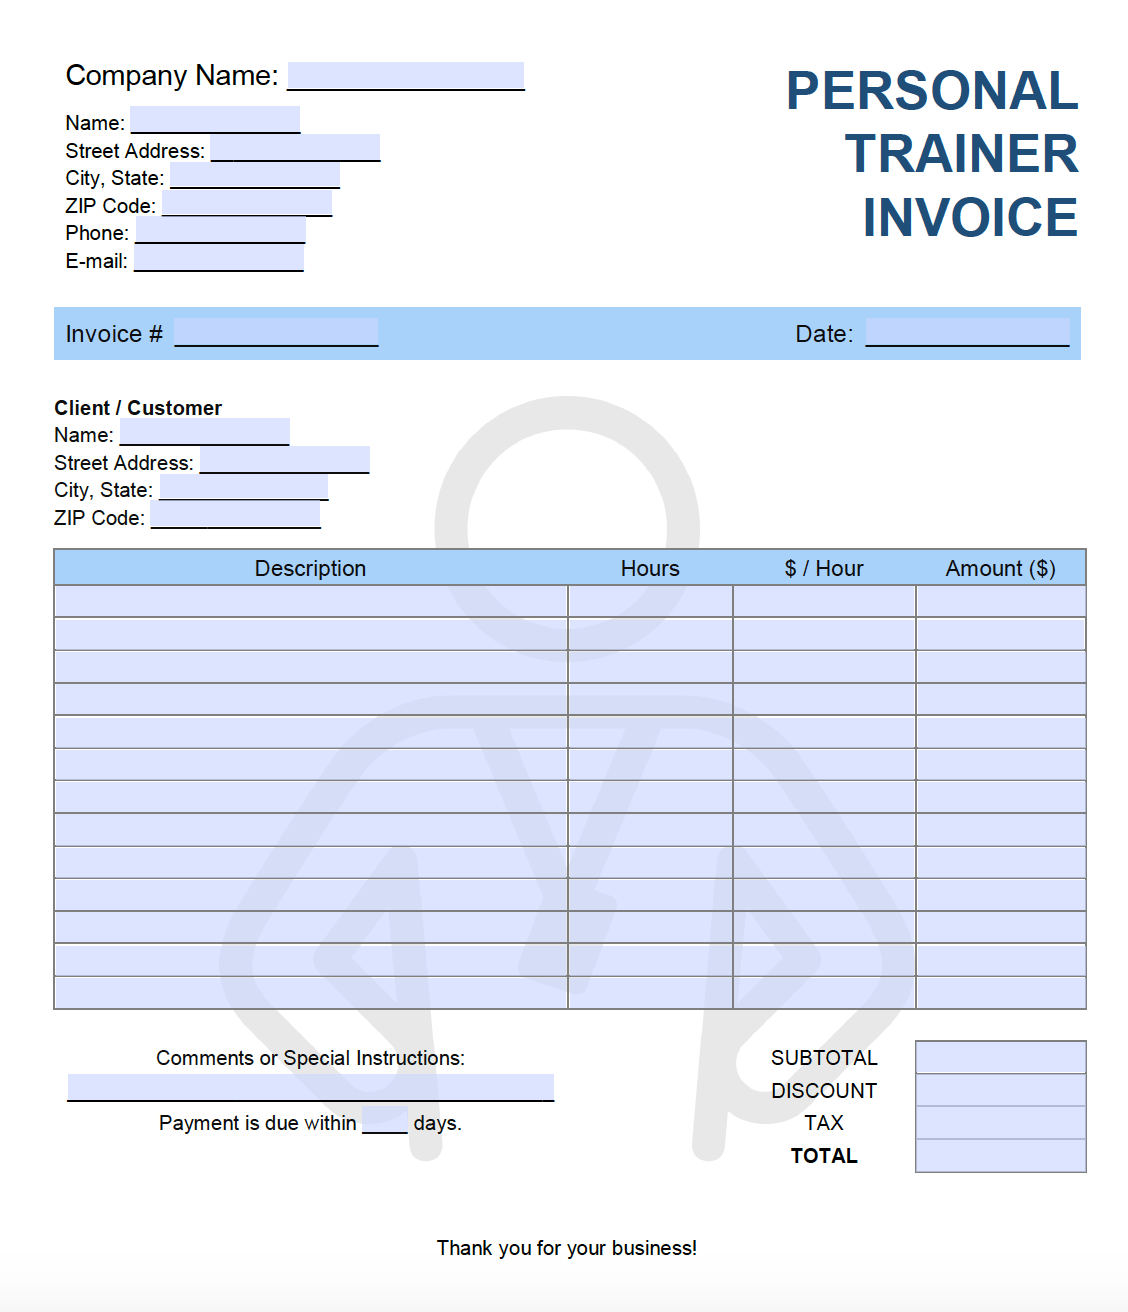 Personal Invoice Template Invoice Template